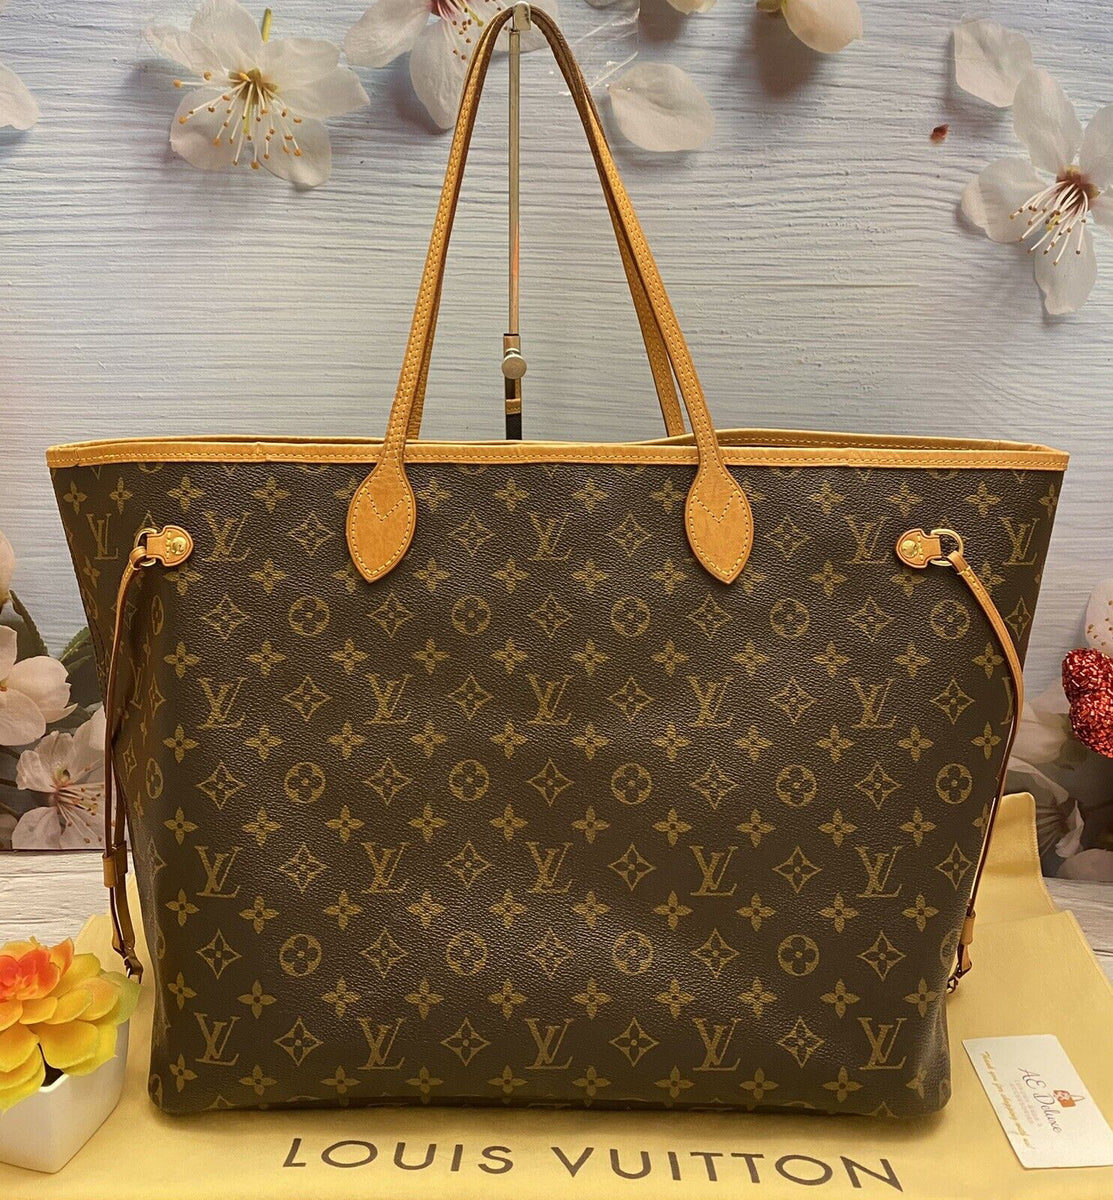 Louis Vuitton Neverfull GM (M40990) Monogram Beige Tote Bag with Bag and  Box